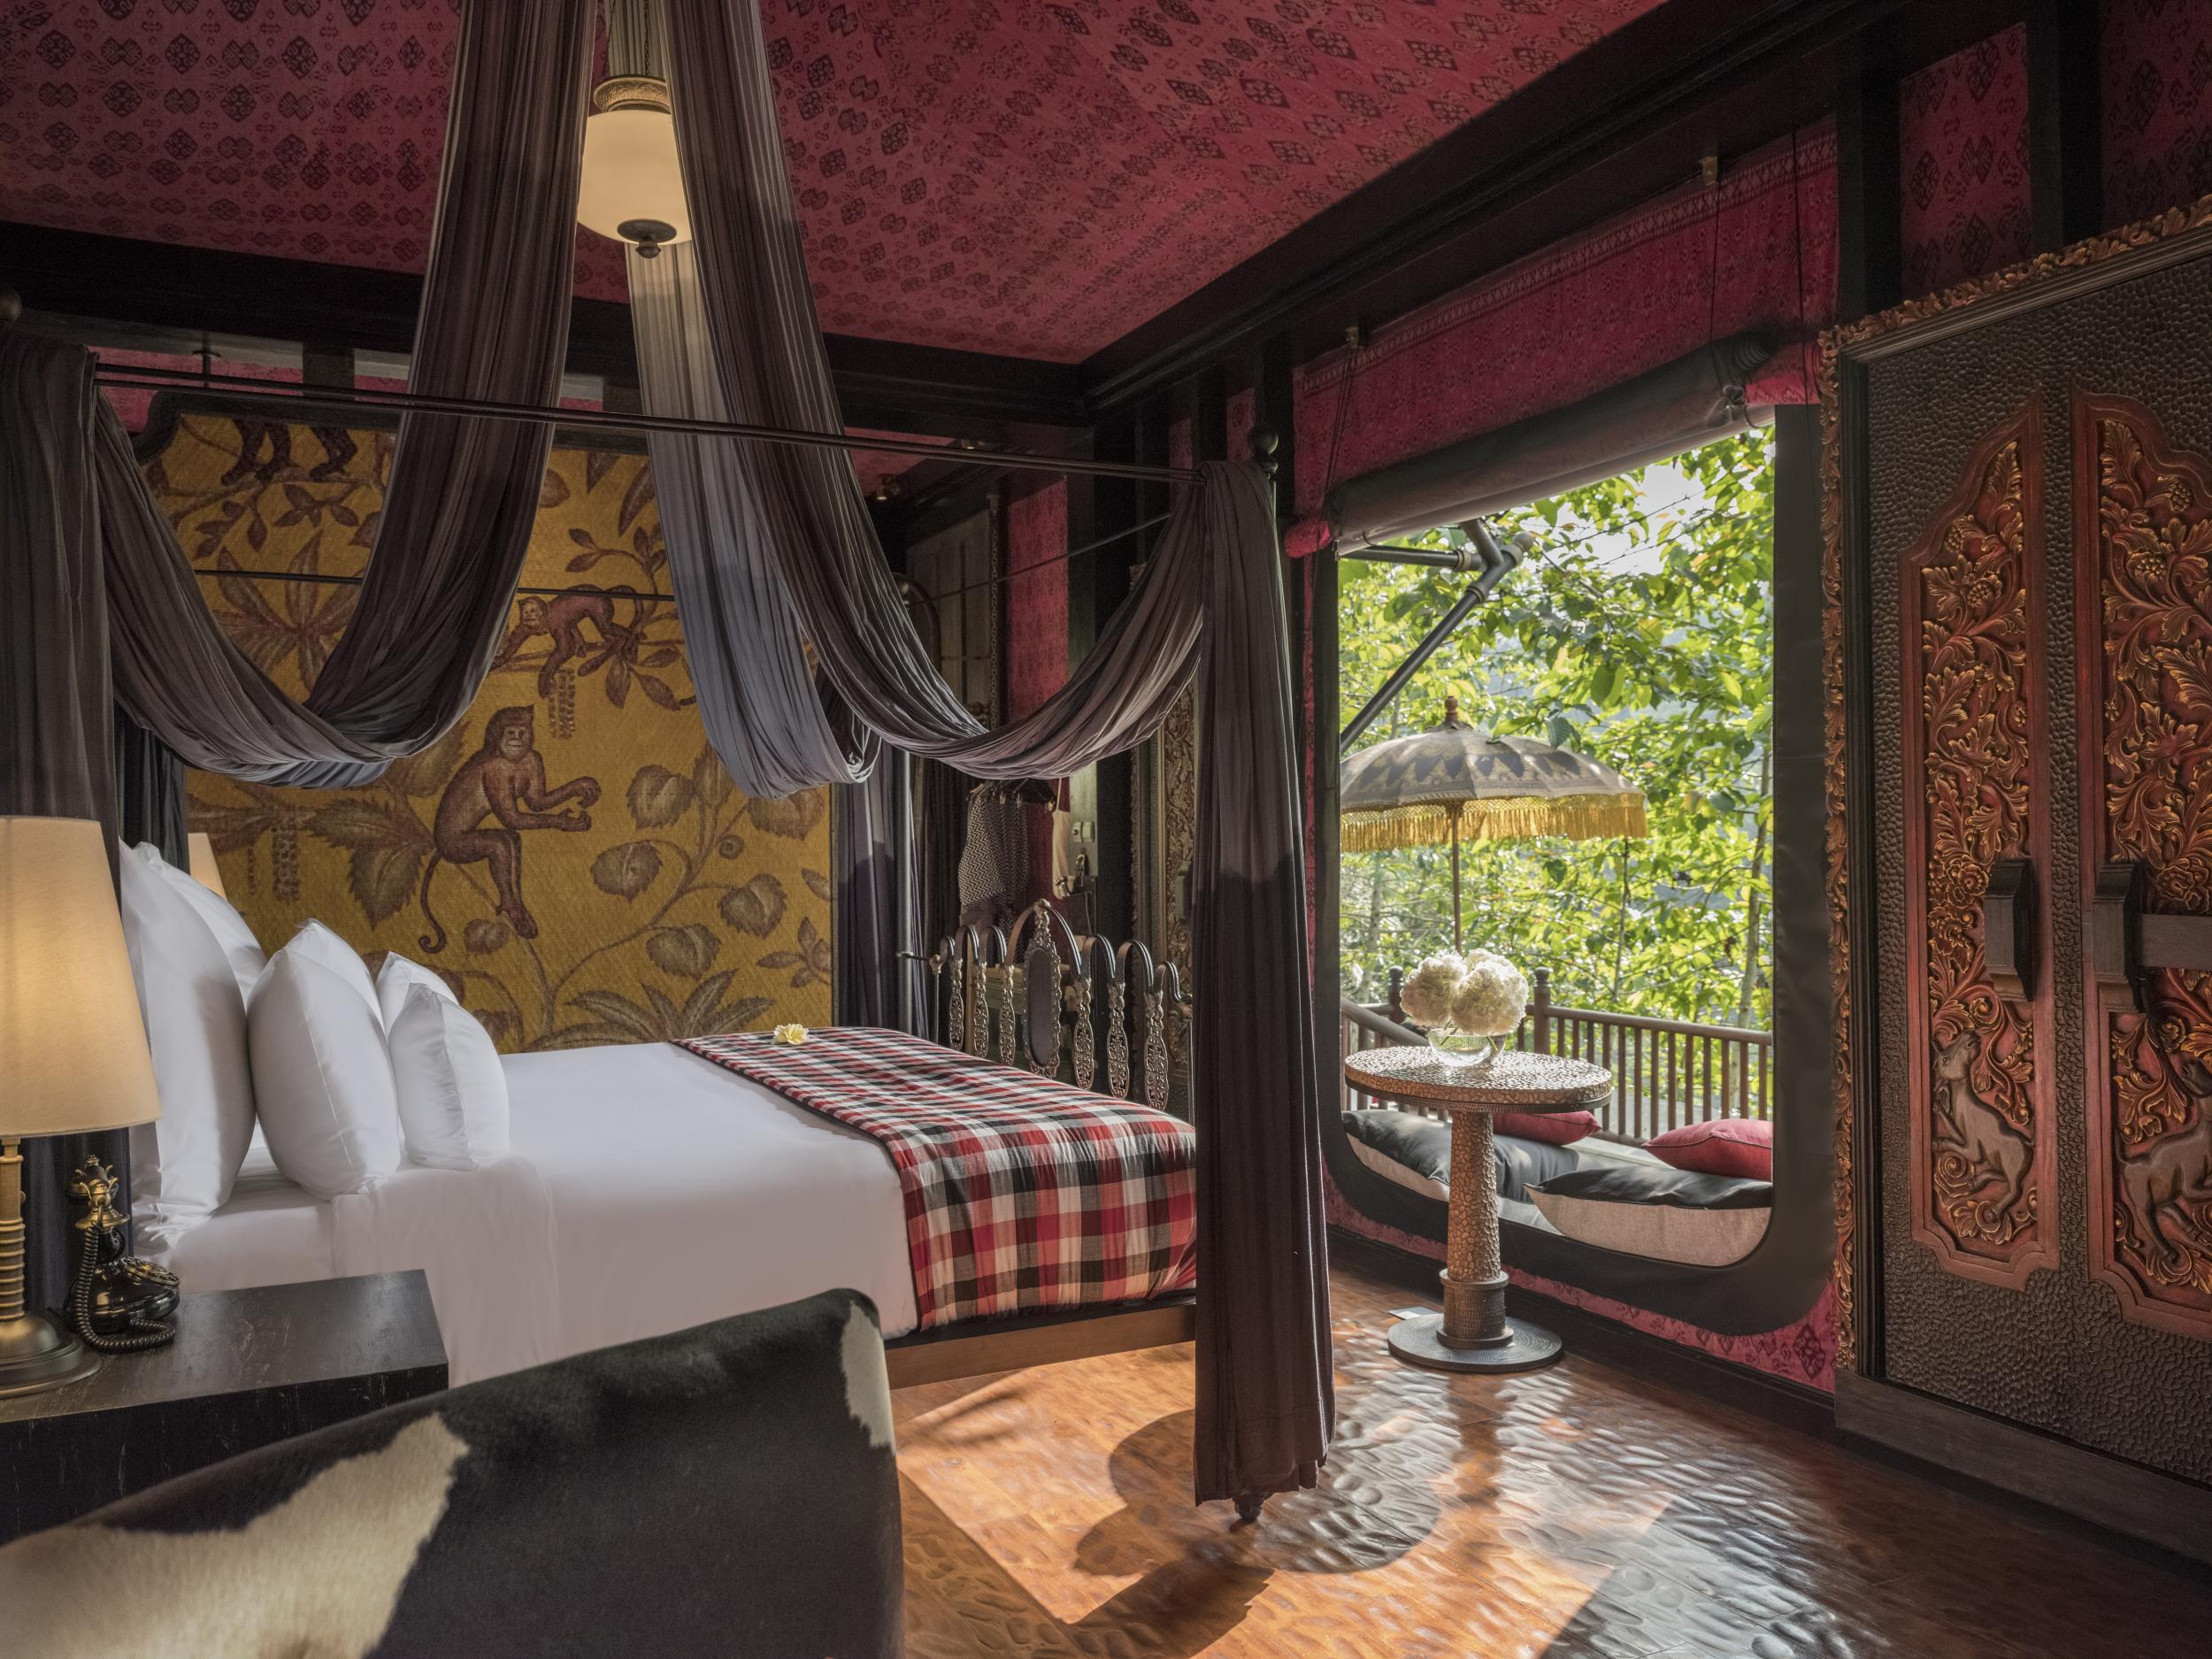 The Keliki Valley bedroom, which offers unobstructed views of the surrounding rainforest and valley